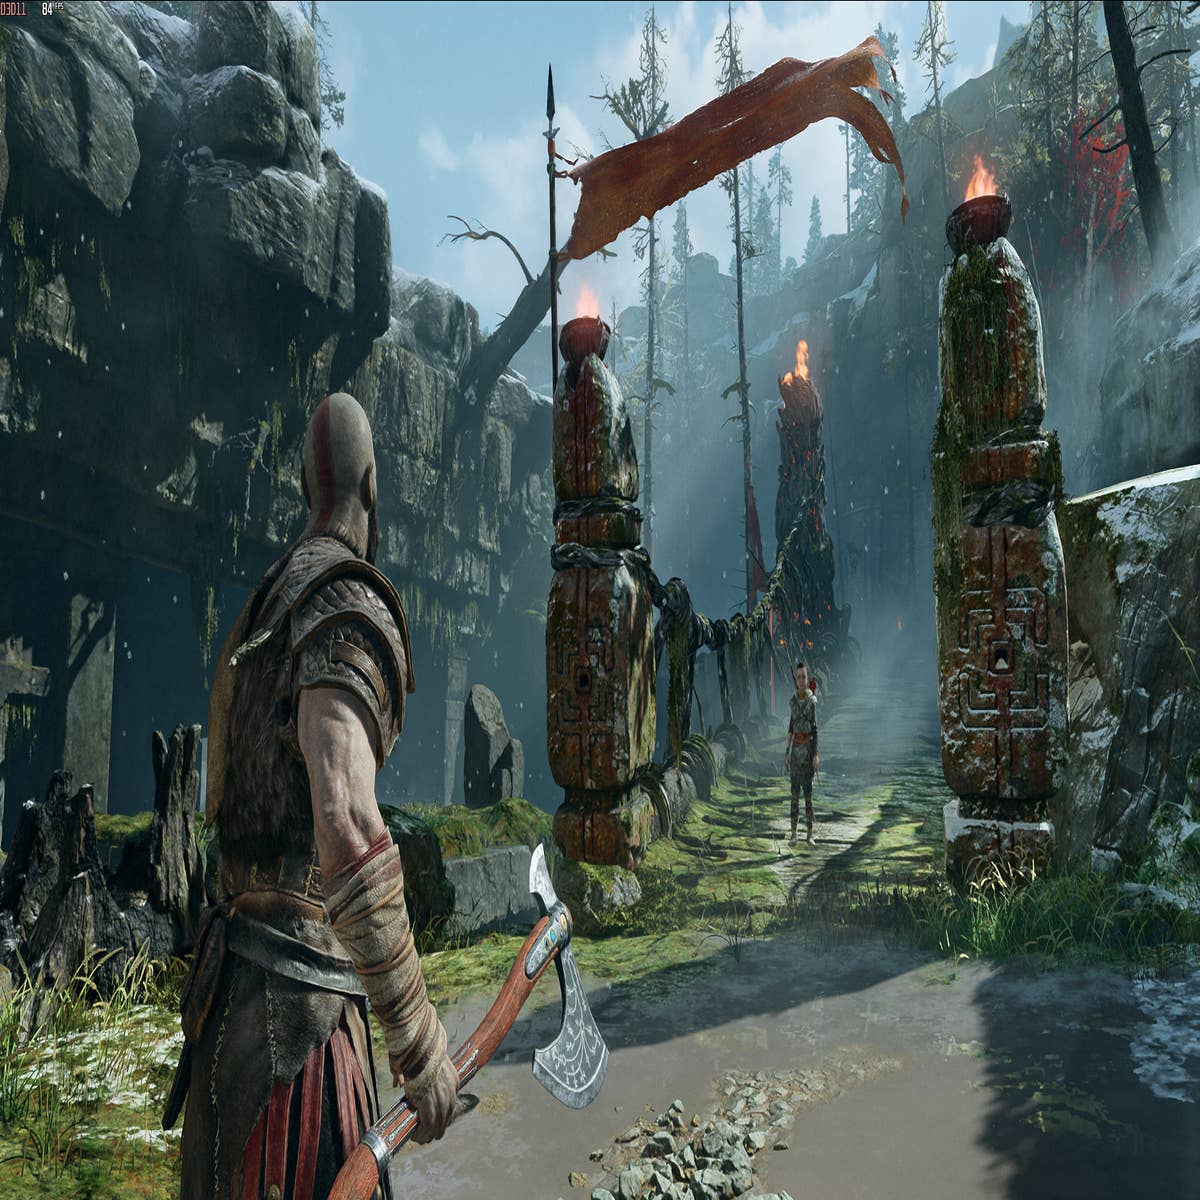 God of War PC impressions: this game deserves a second wind